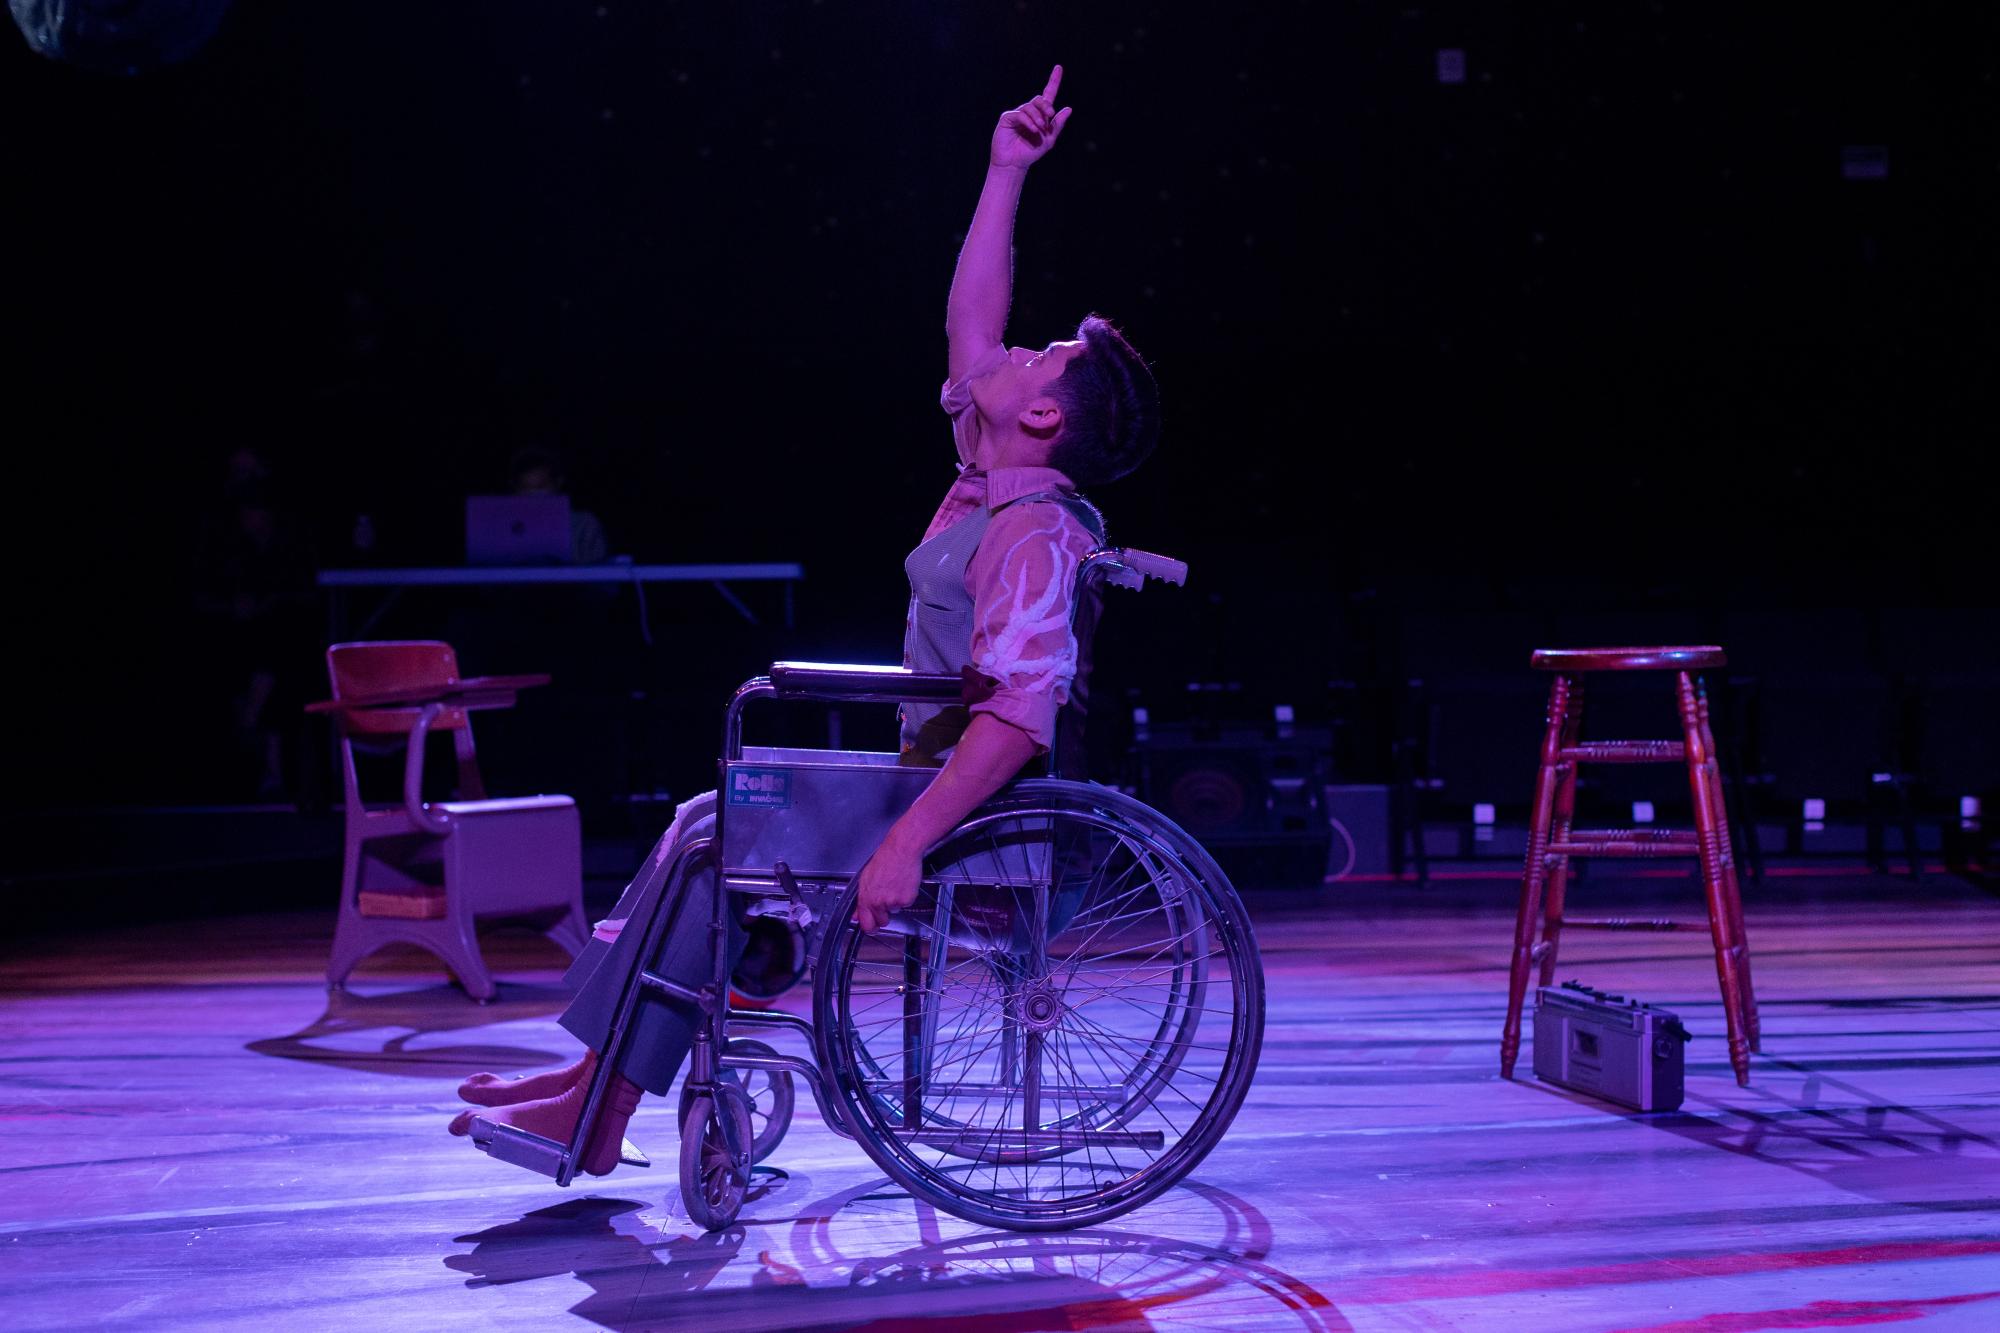 man in a wheelchair points upward, washed in purple stage lighting